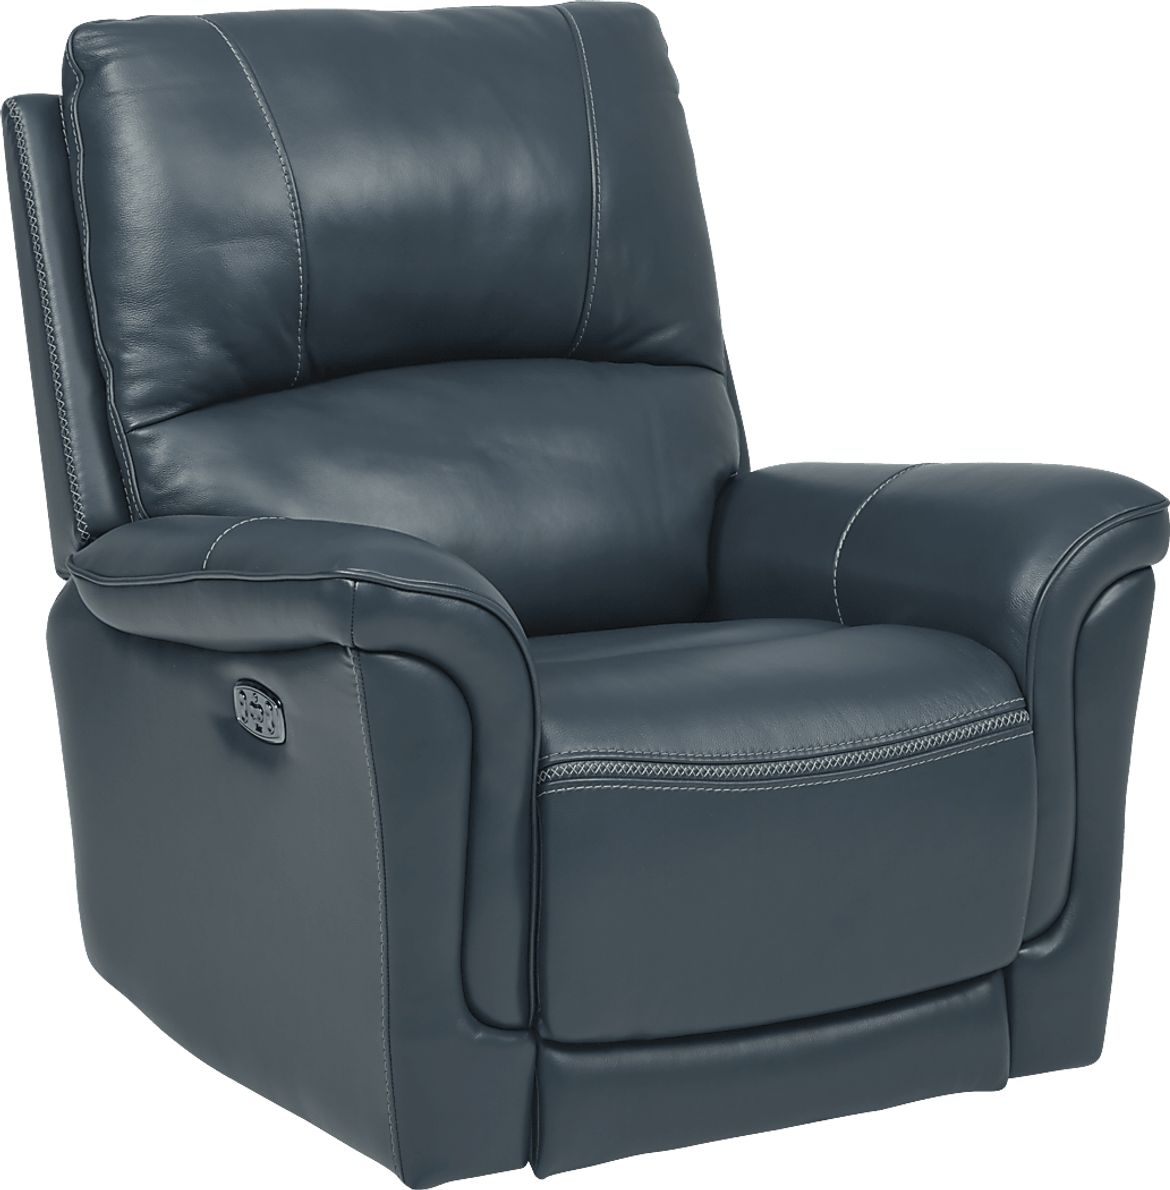 Castmore Navy Blue Leather Triple Power Recliner - Rooms To Go